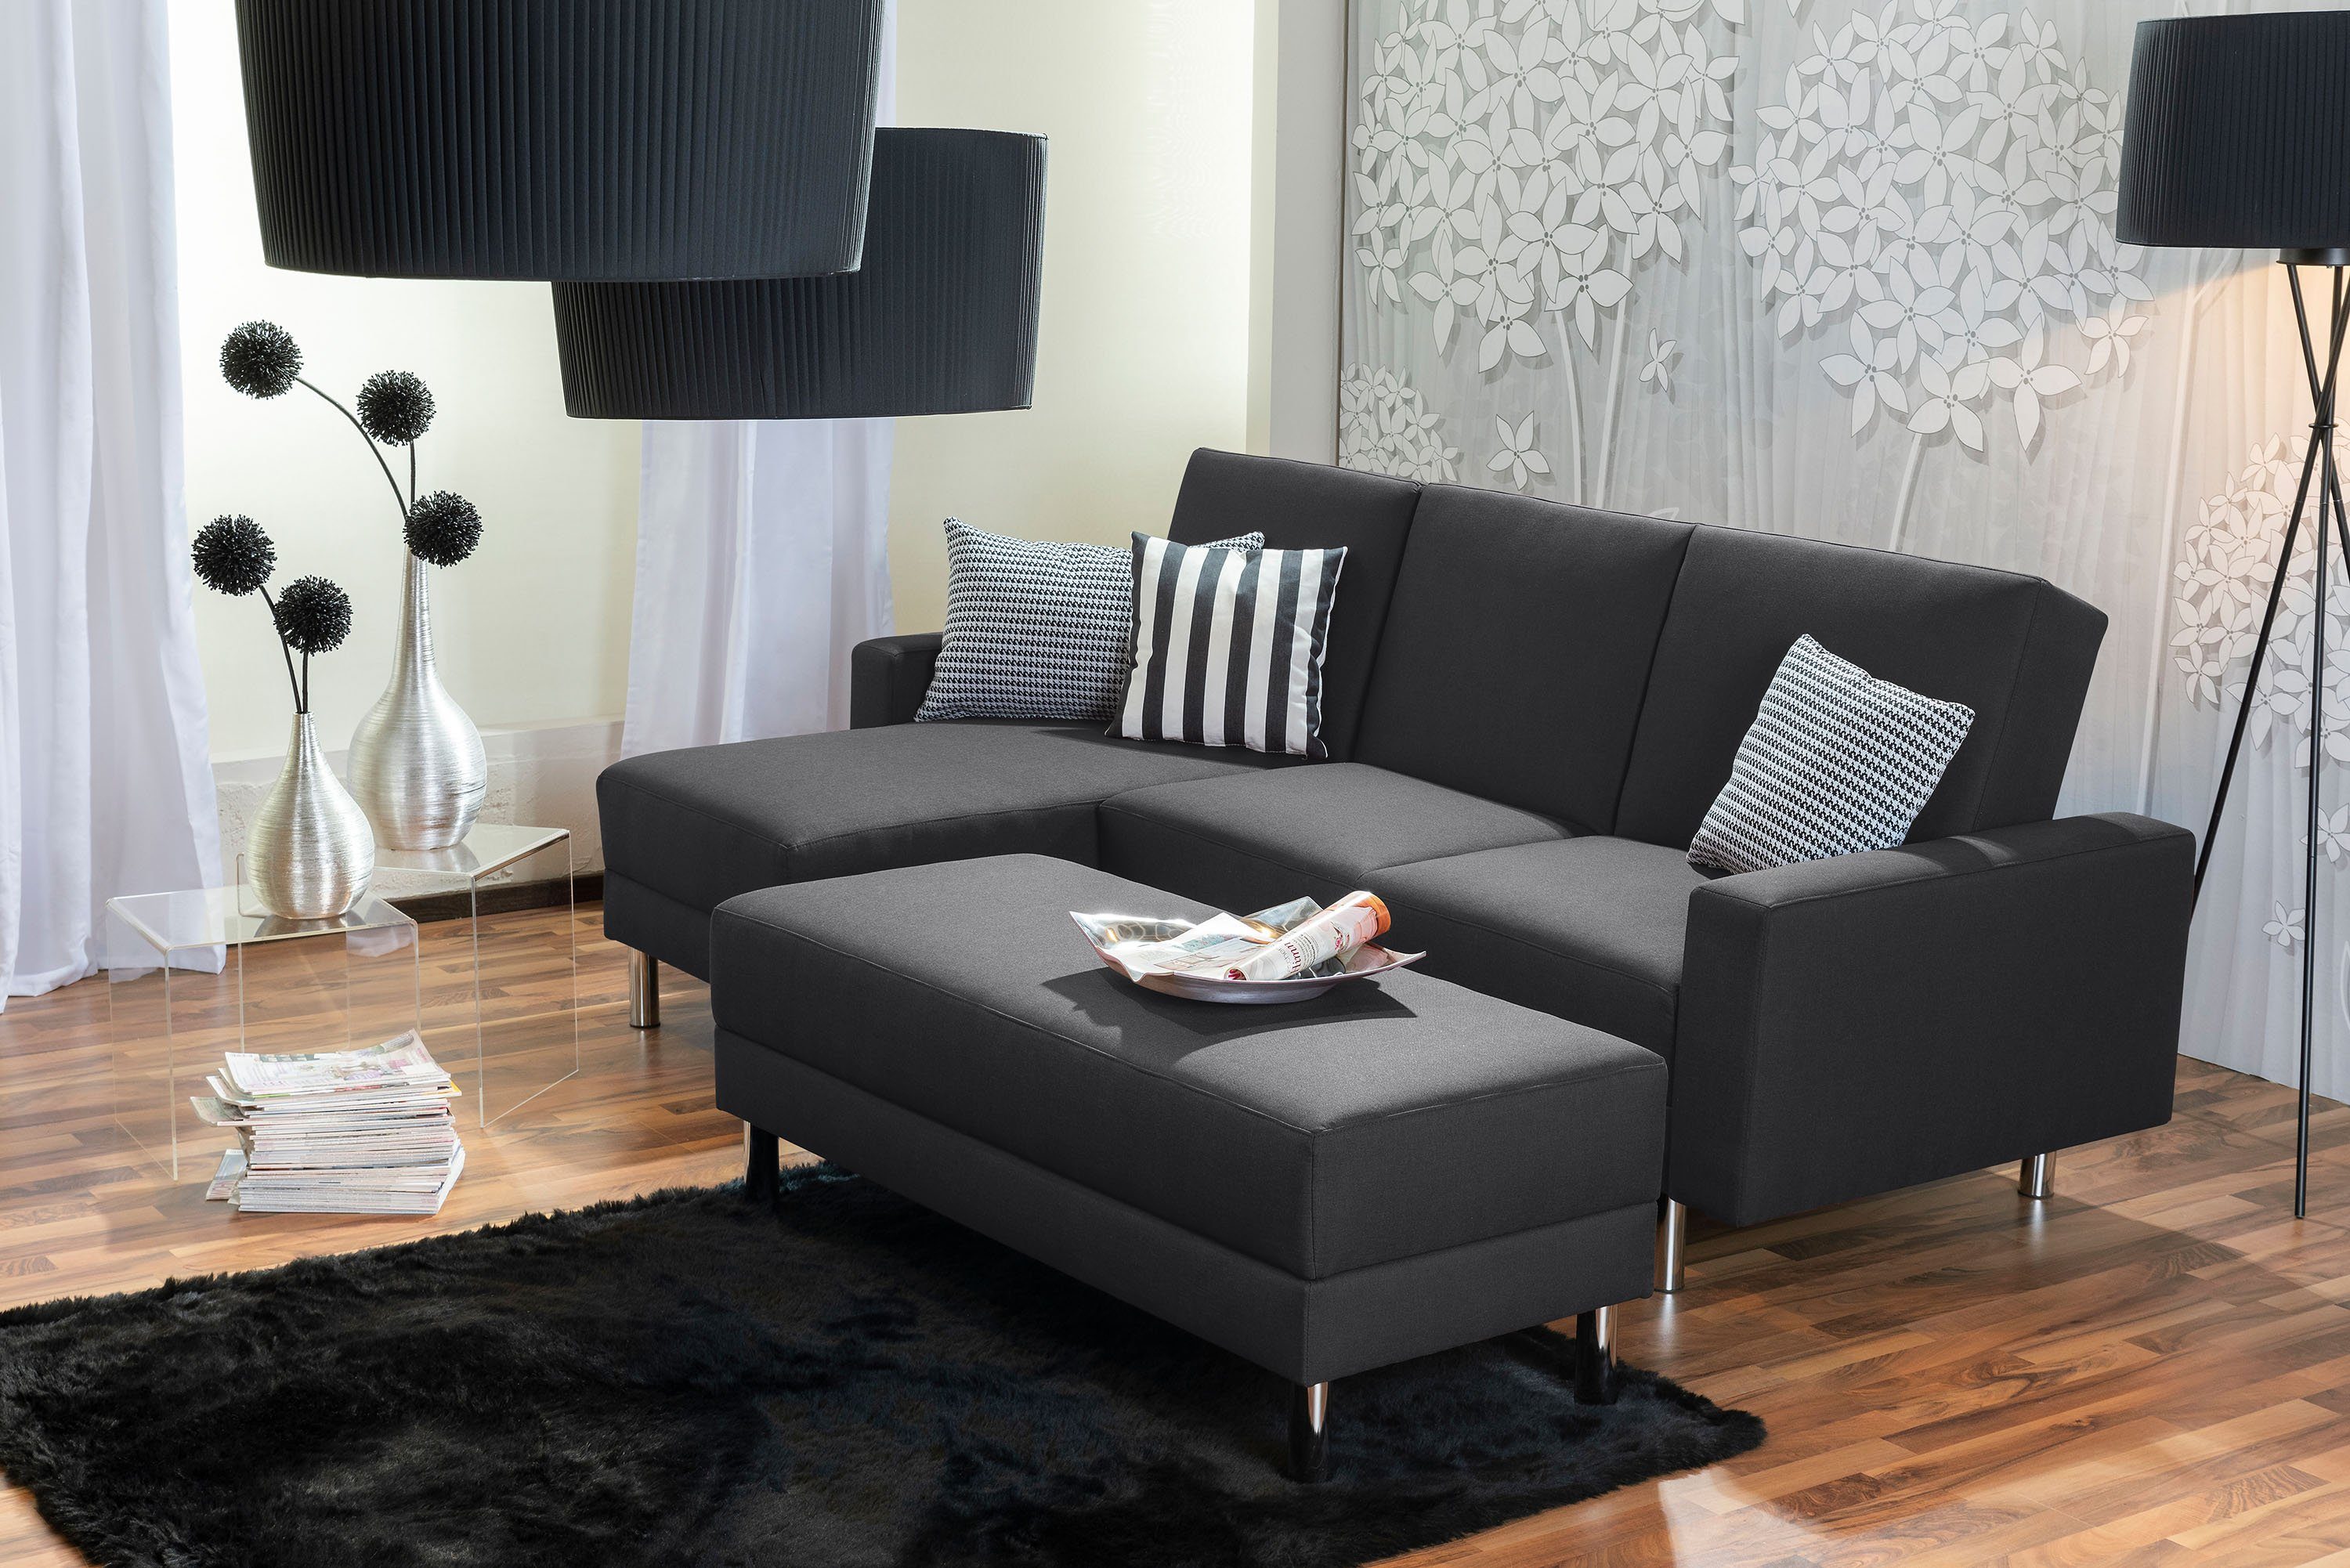 Max Winzer® Loungesofa Germany Just Stück, 1 graphit, Flachgewebe Made Fashion Funktionssofa in